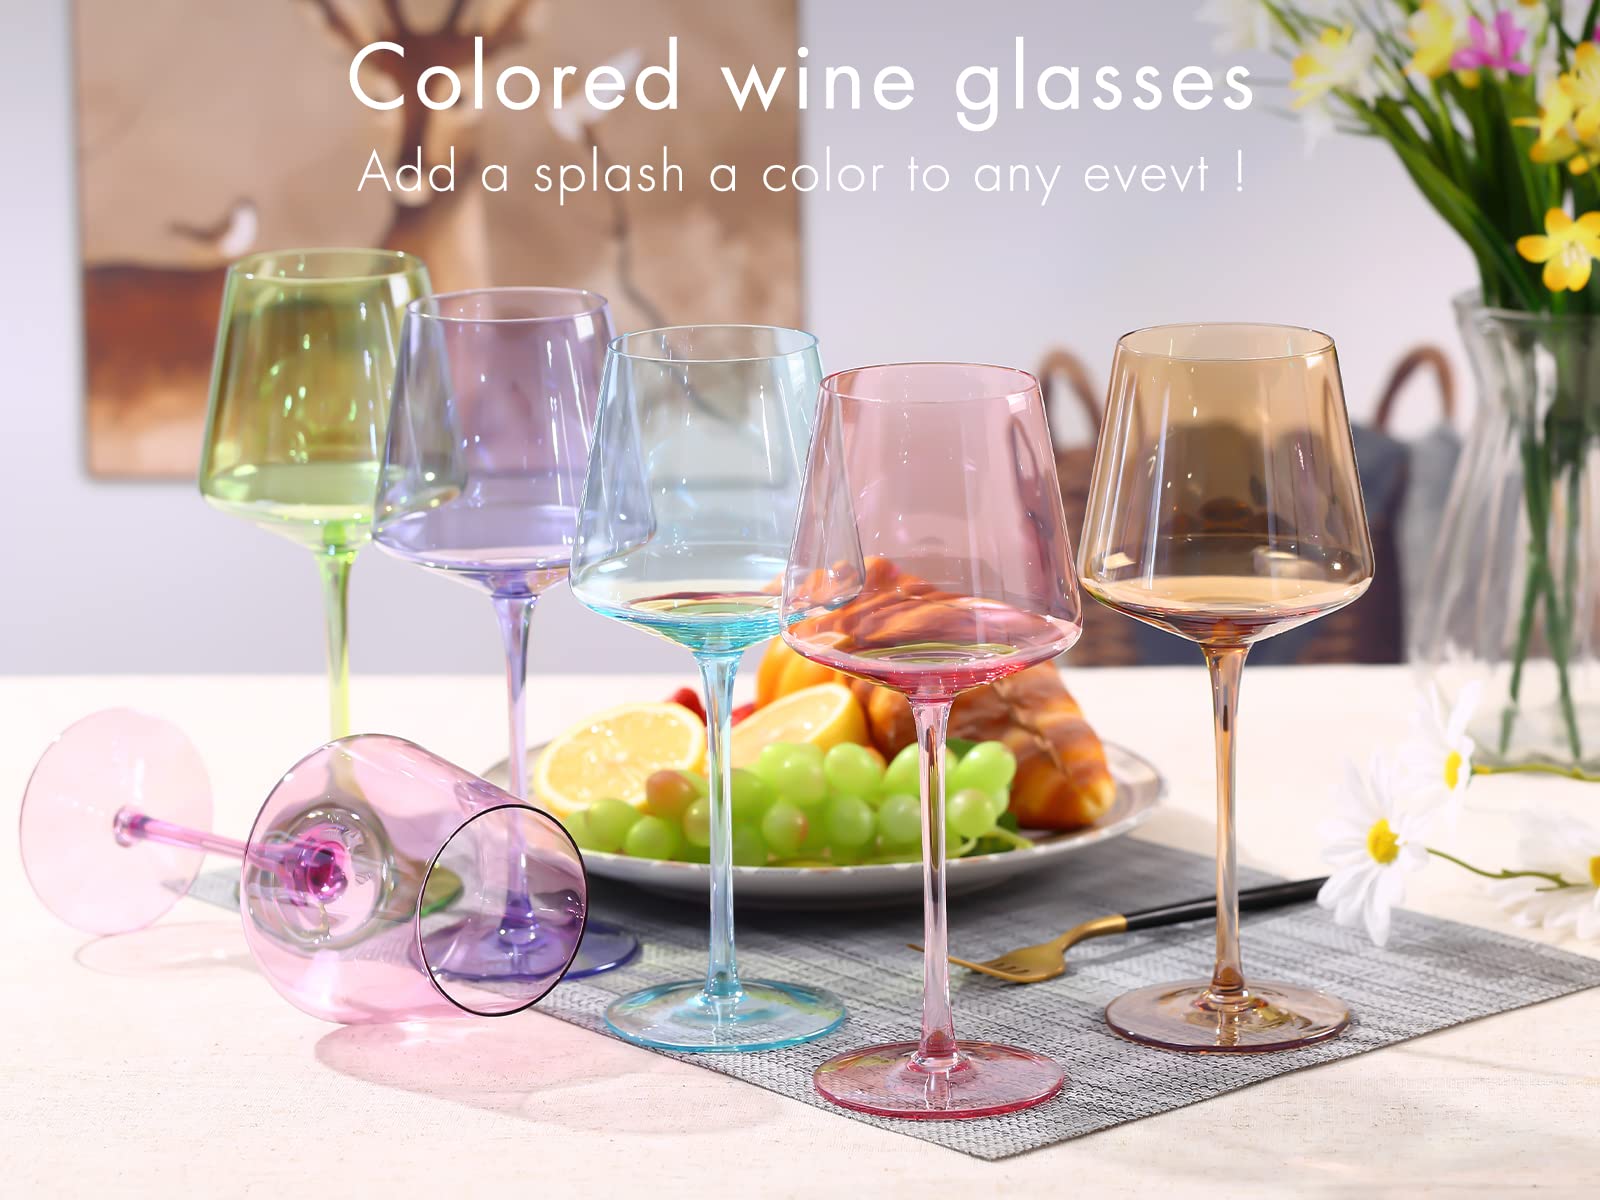 comfit Colored Wine Glasses set of 6-Crystal Colorful Wine Glasses With Long Stem,Square wine glasses with flat bottom,Ideal for full-bodied wine,Wine gifts for wedding,housewarming18OZ